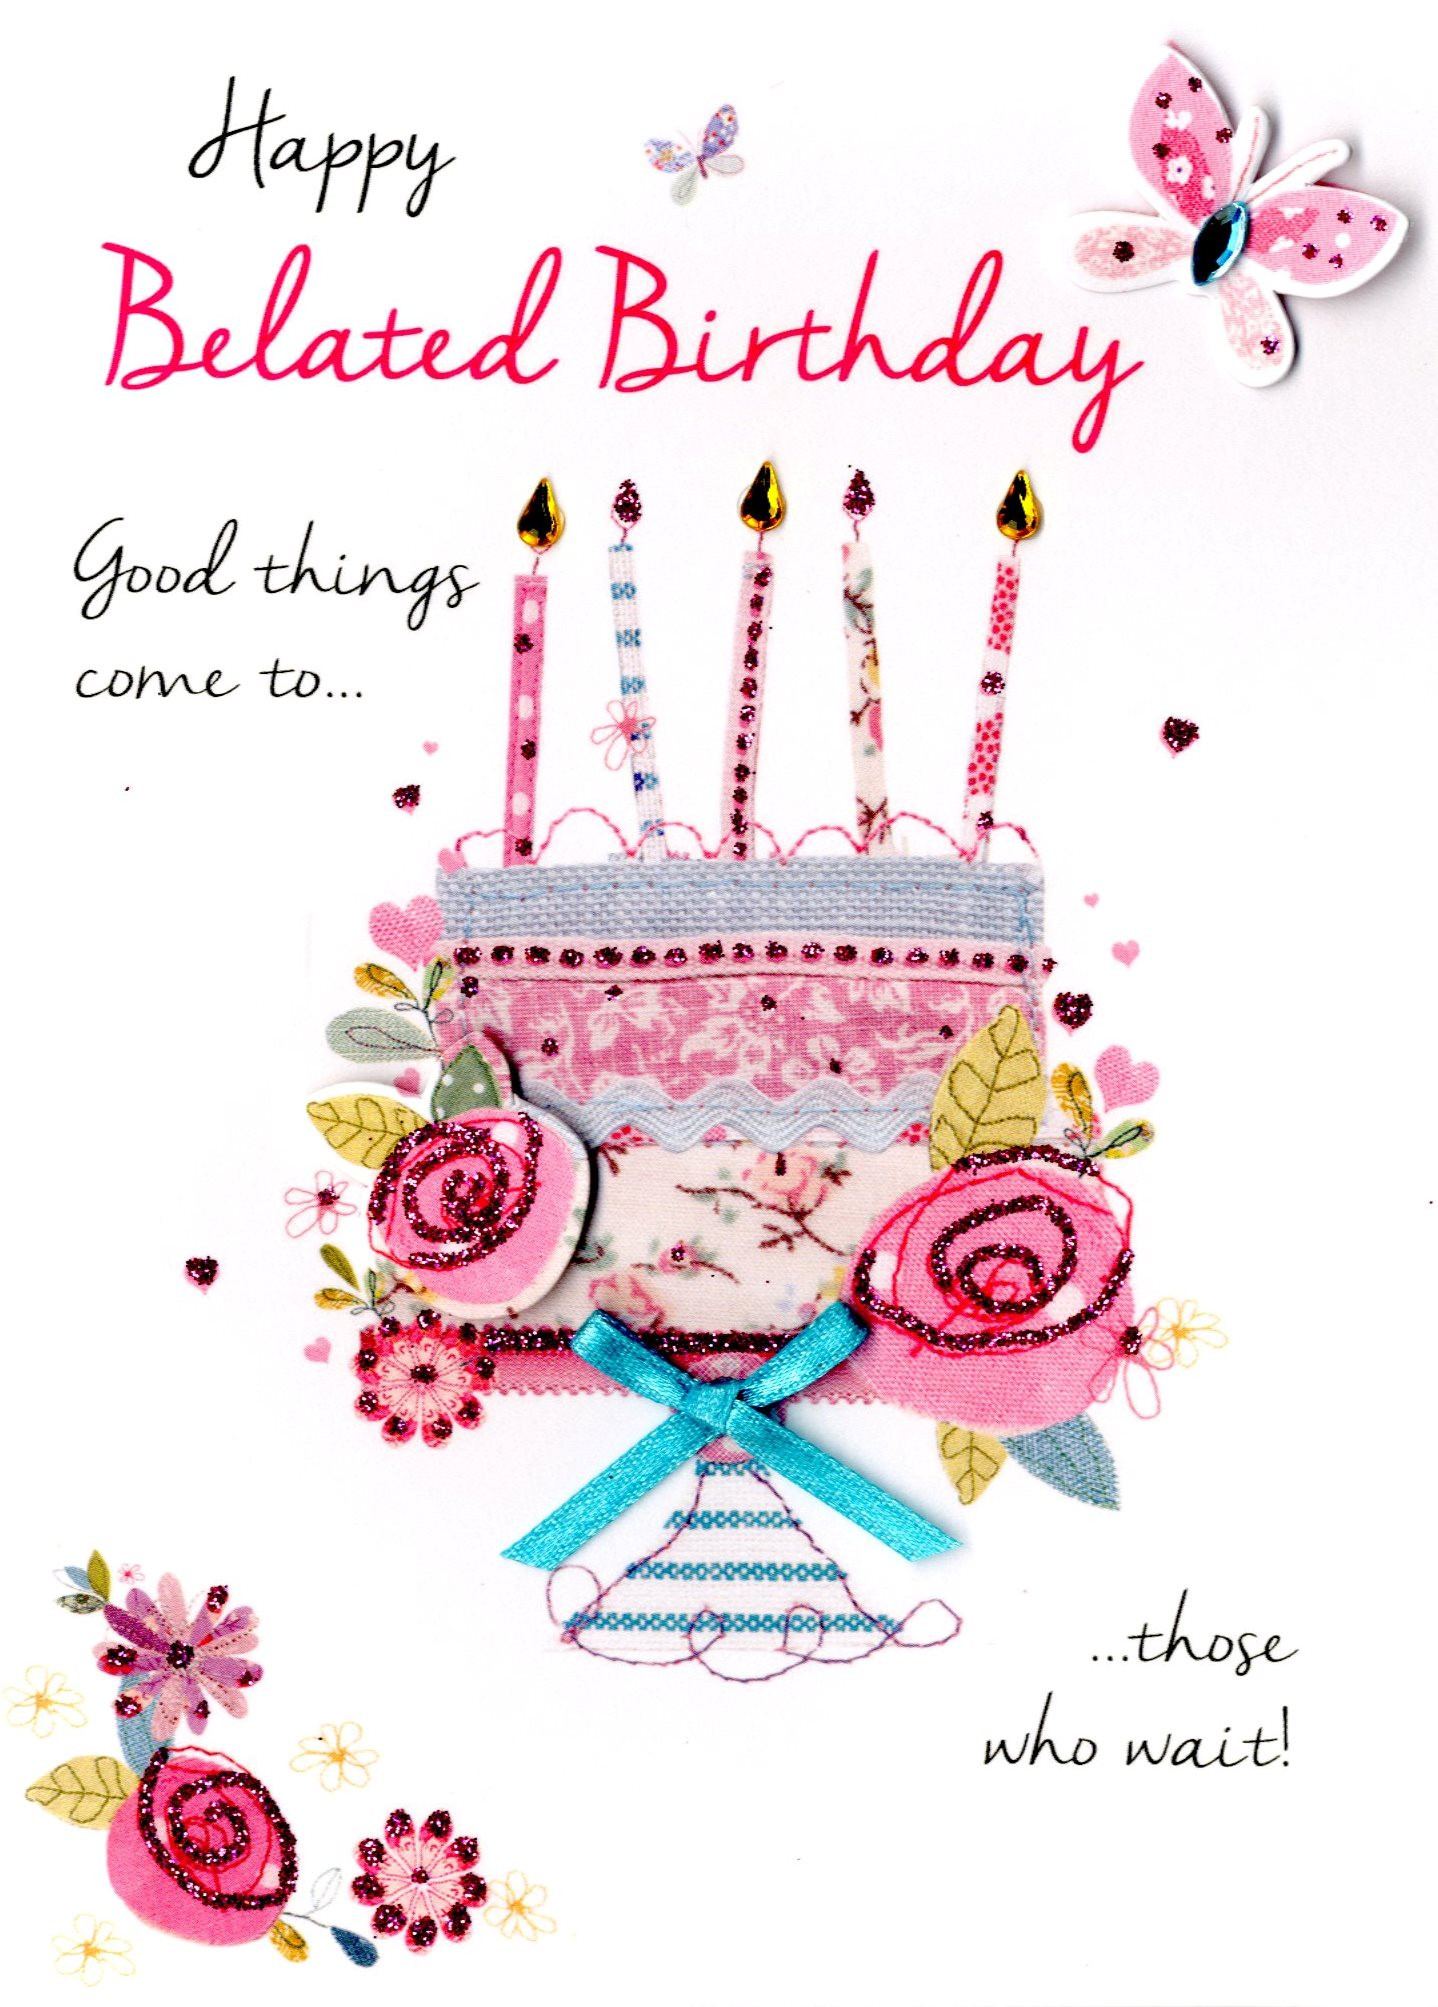 Happy Belated Birthday Cards
 Happy Belated Birthday Greeting Card Second Nature Just To